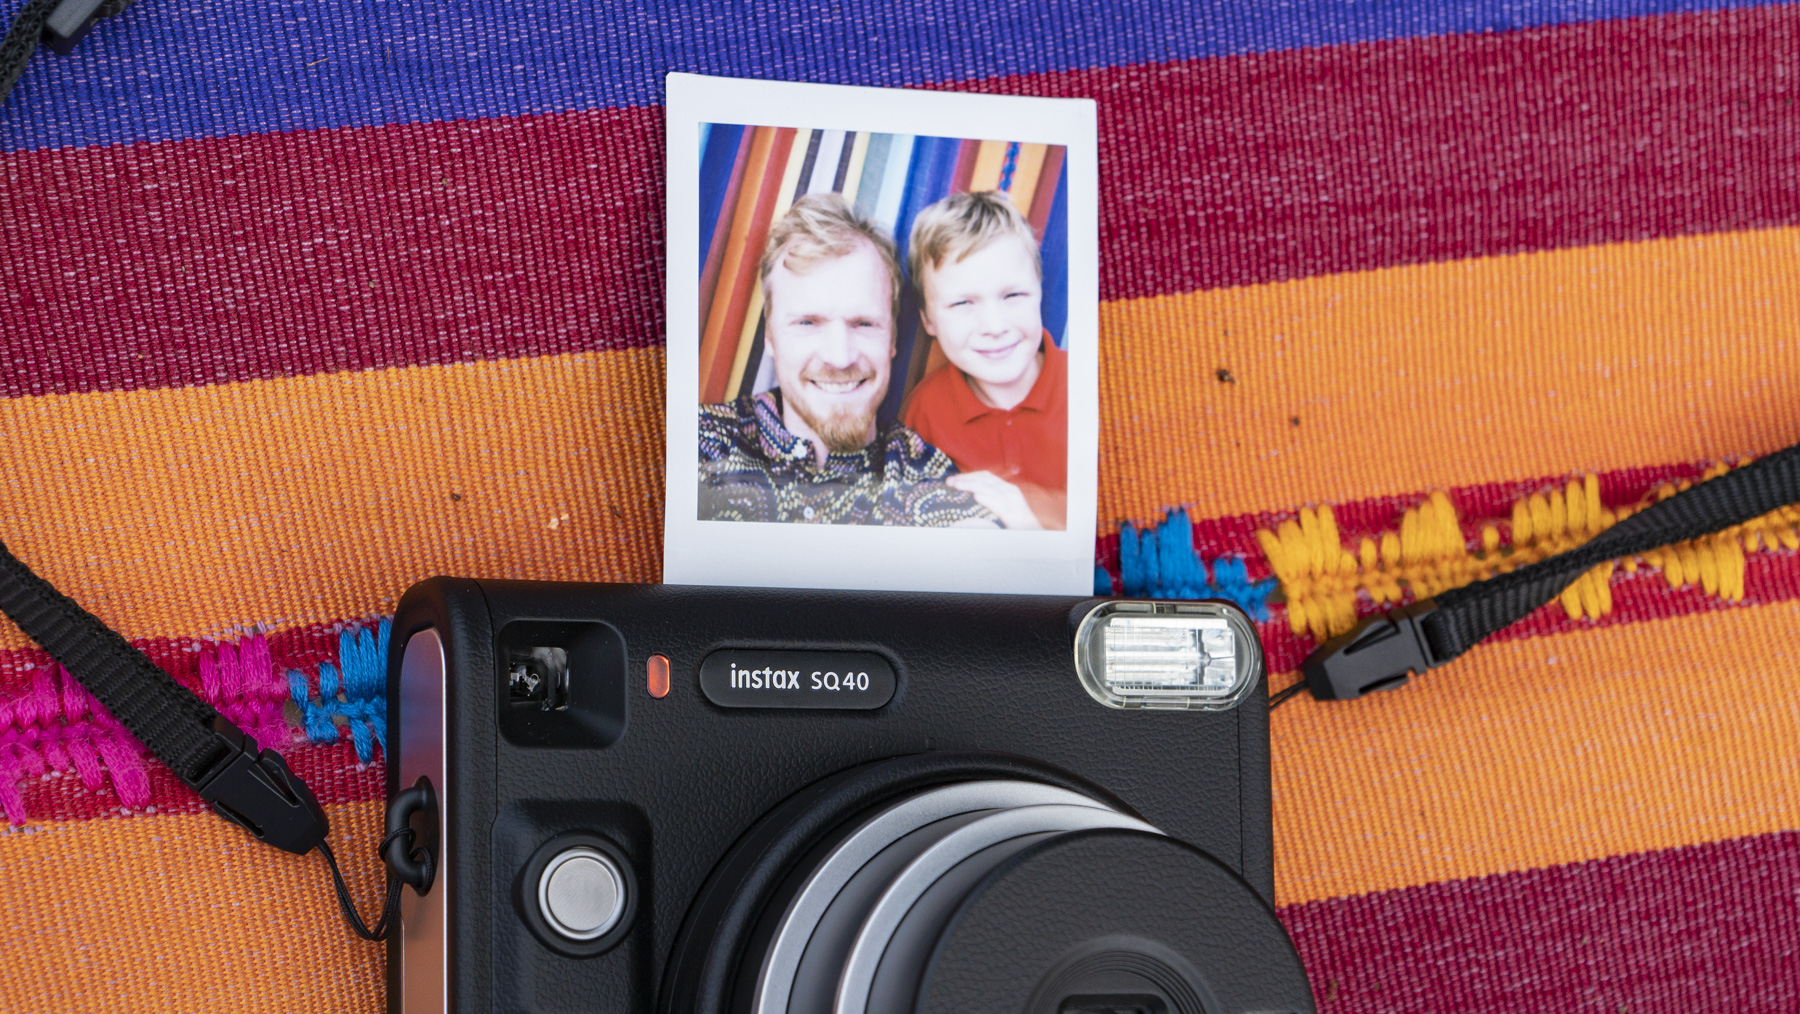 Fujifilm Instax SQ40 camera on a multi-color fabric background with print